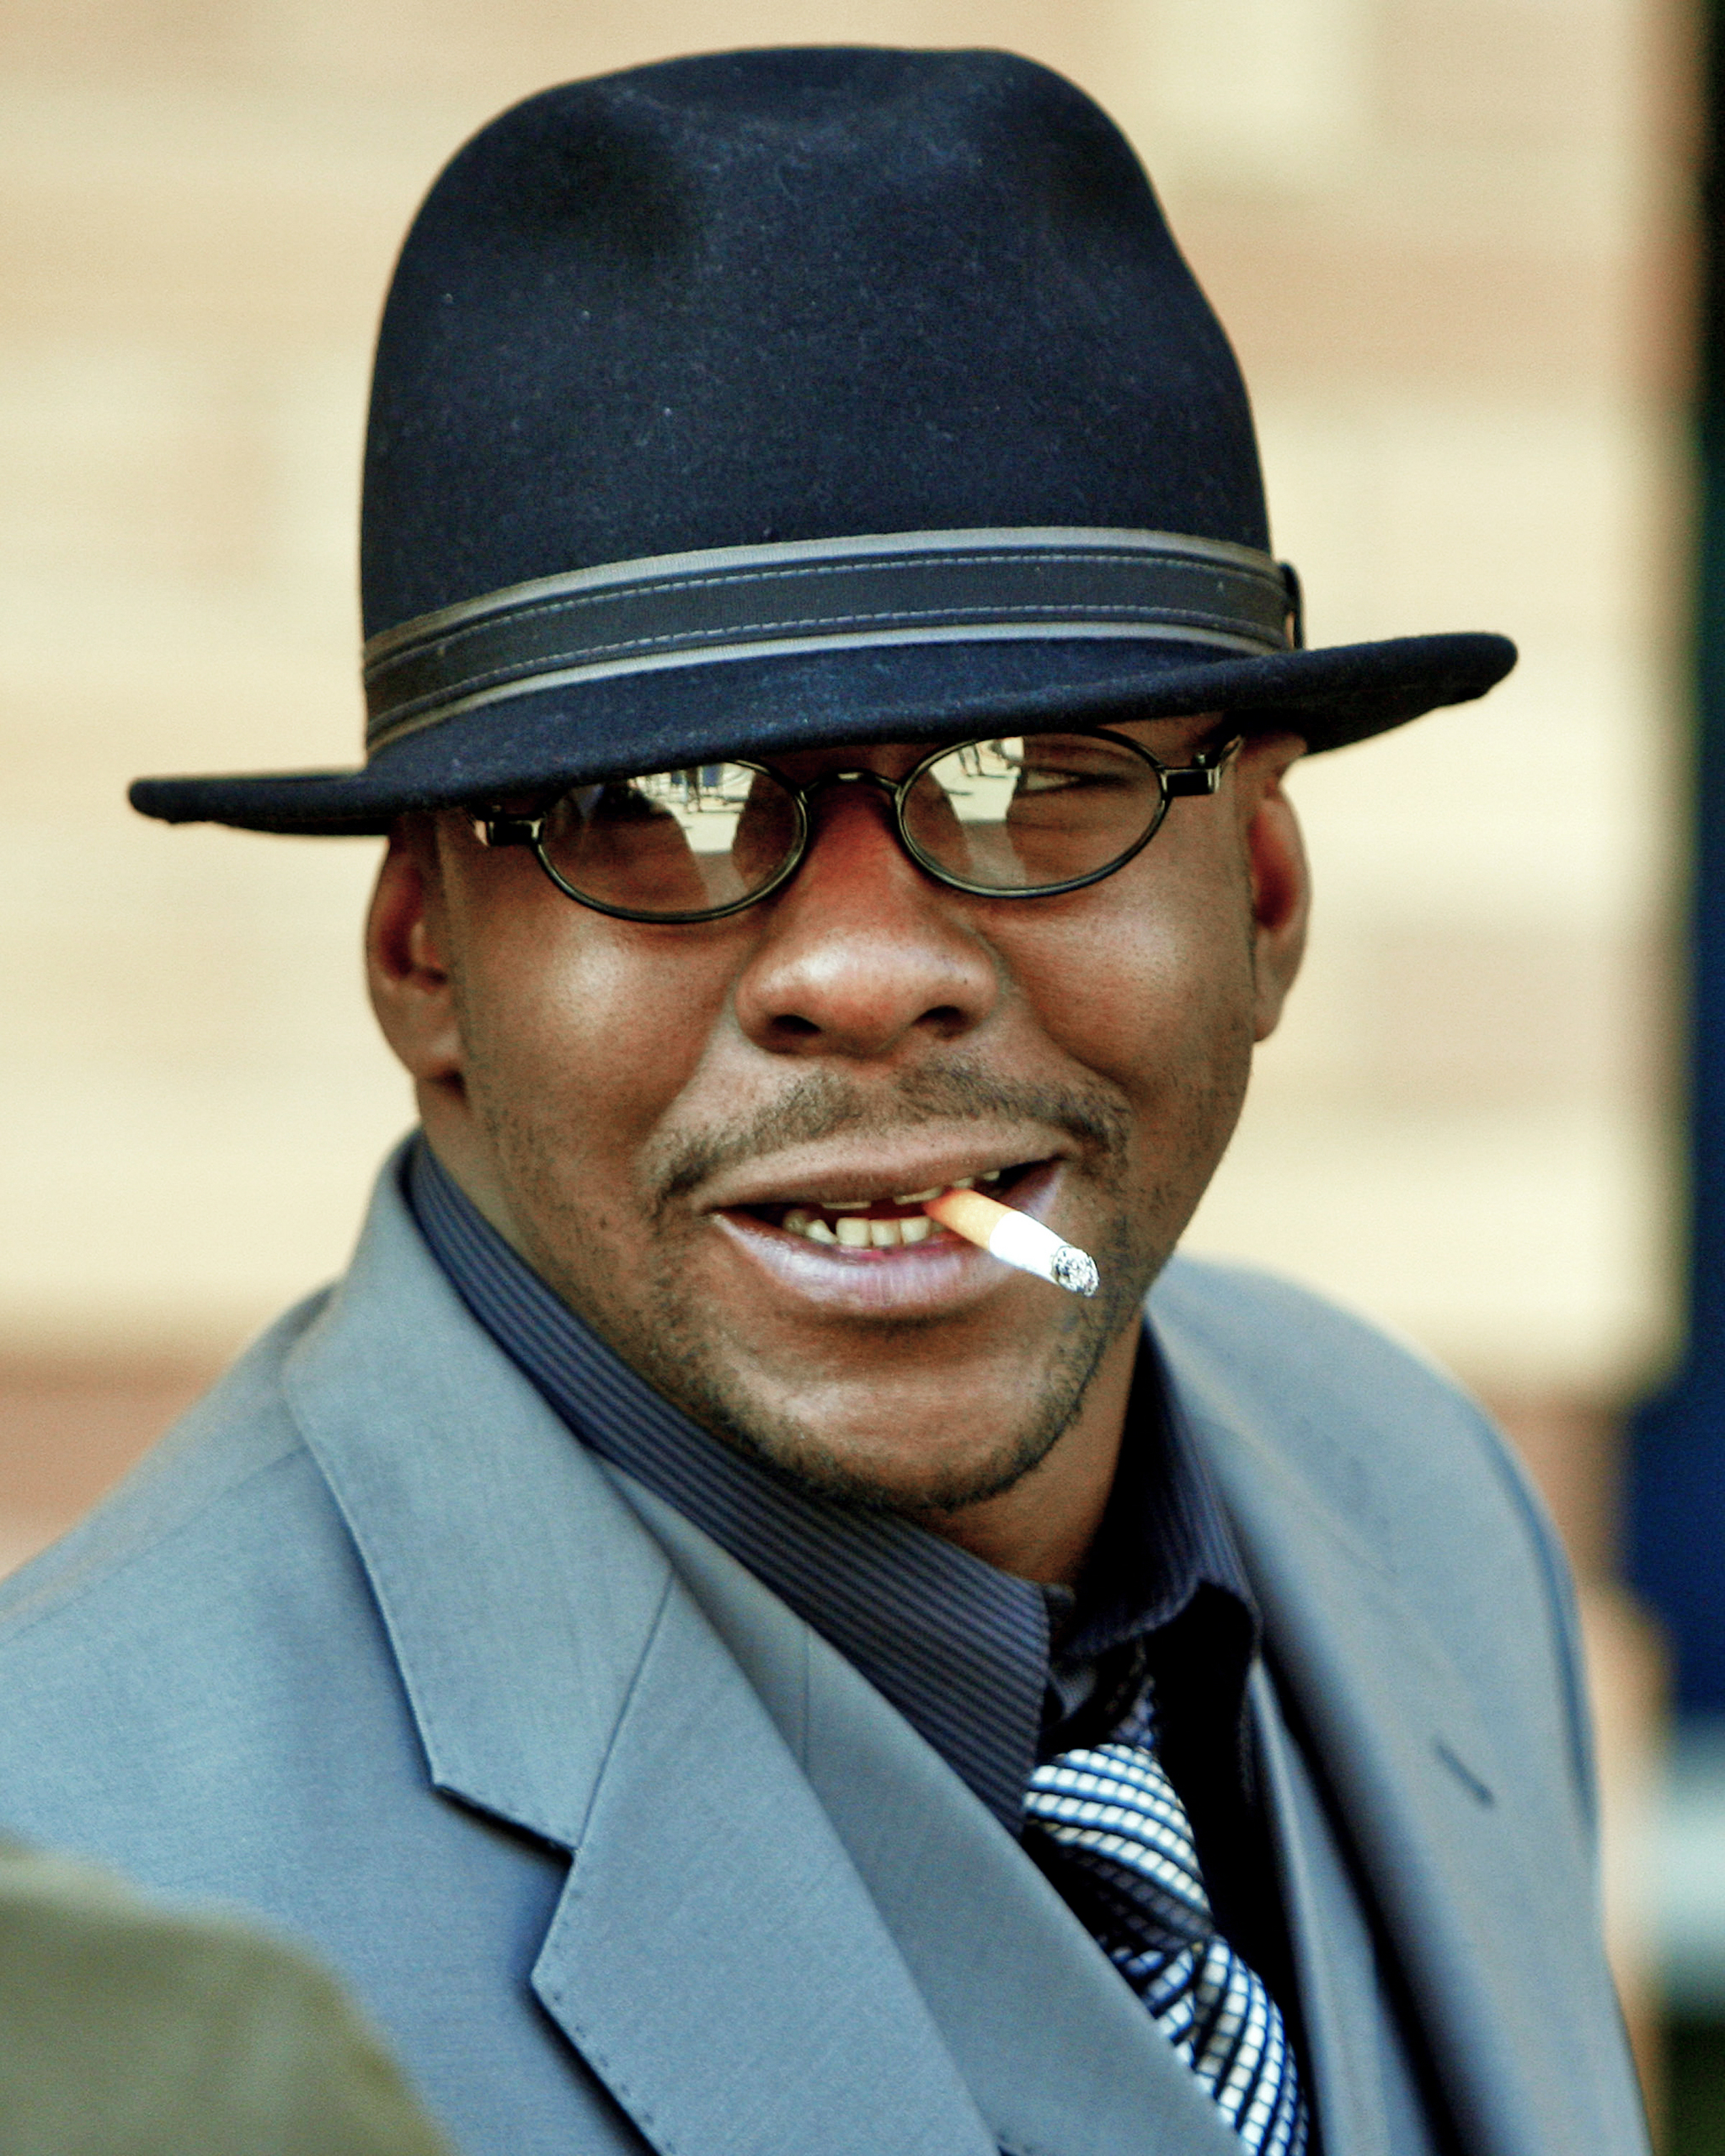 Bobby Brown King of R and B - bobby-brown Photo - Bobby-Brown-King-of-R-and-B-bobby-brown-24549564-2048-2560